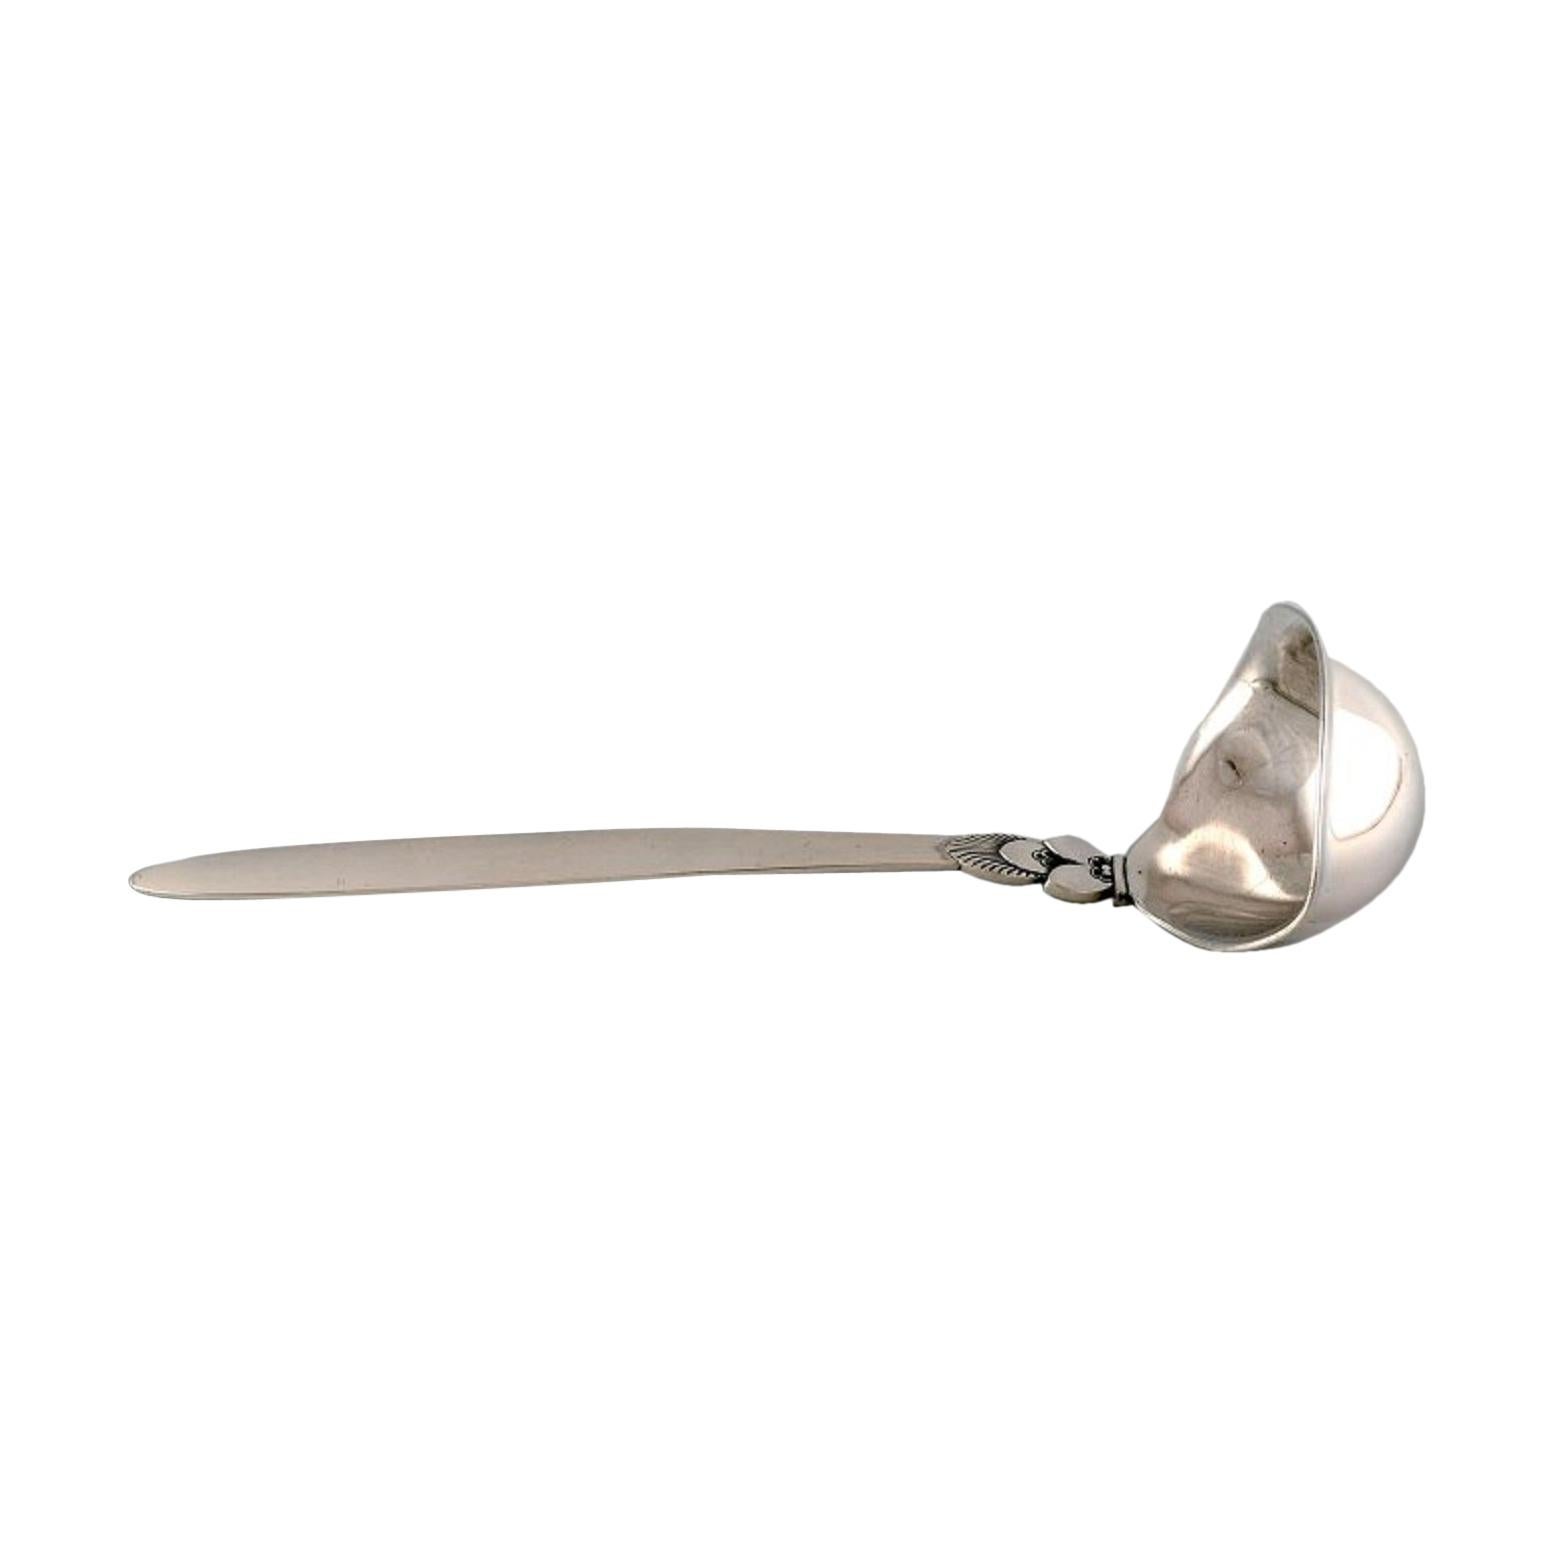 Large Georg Jensen "Cactus" Sauce Spoon in Sterling Silver, Dated 1932 For Sale